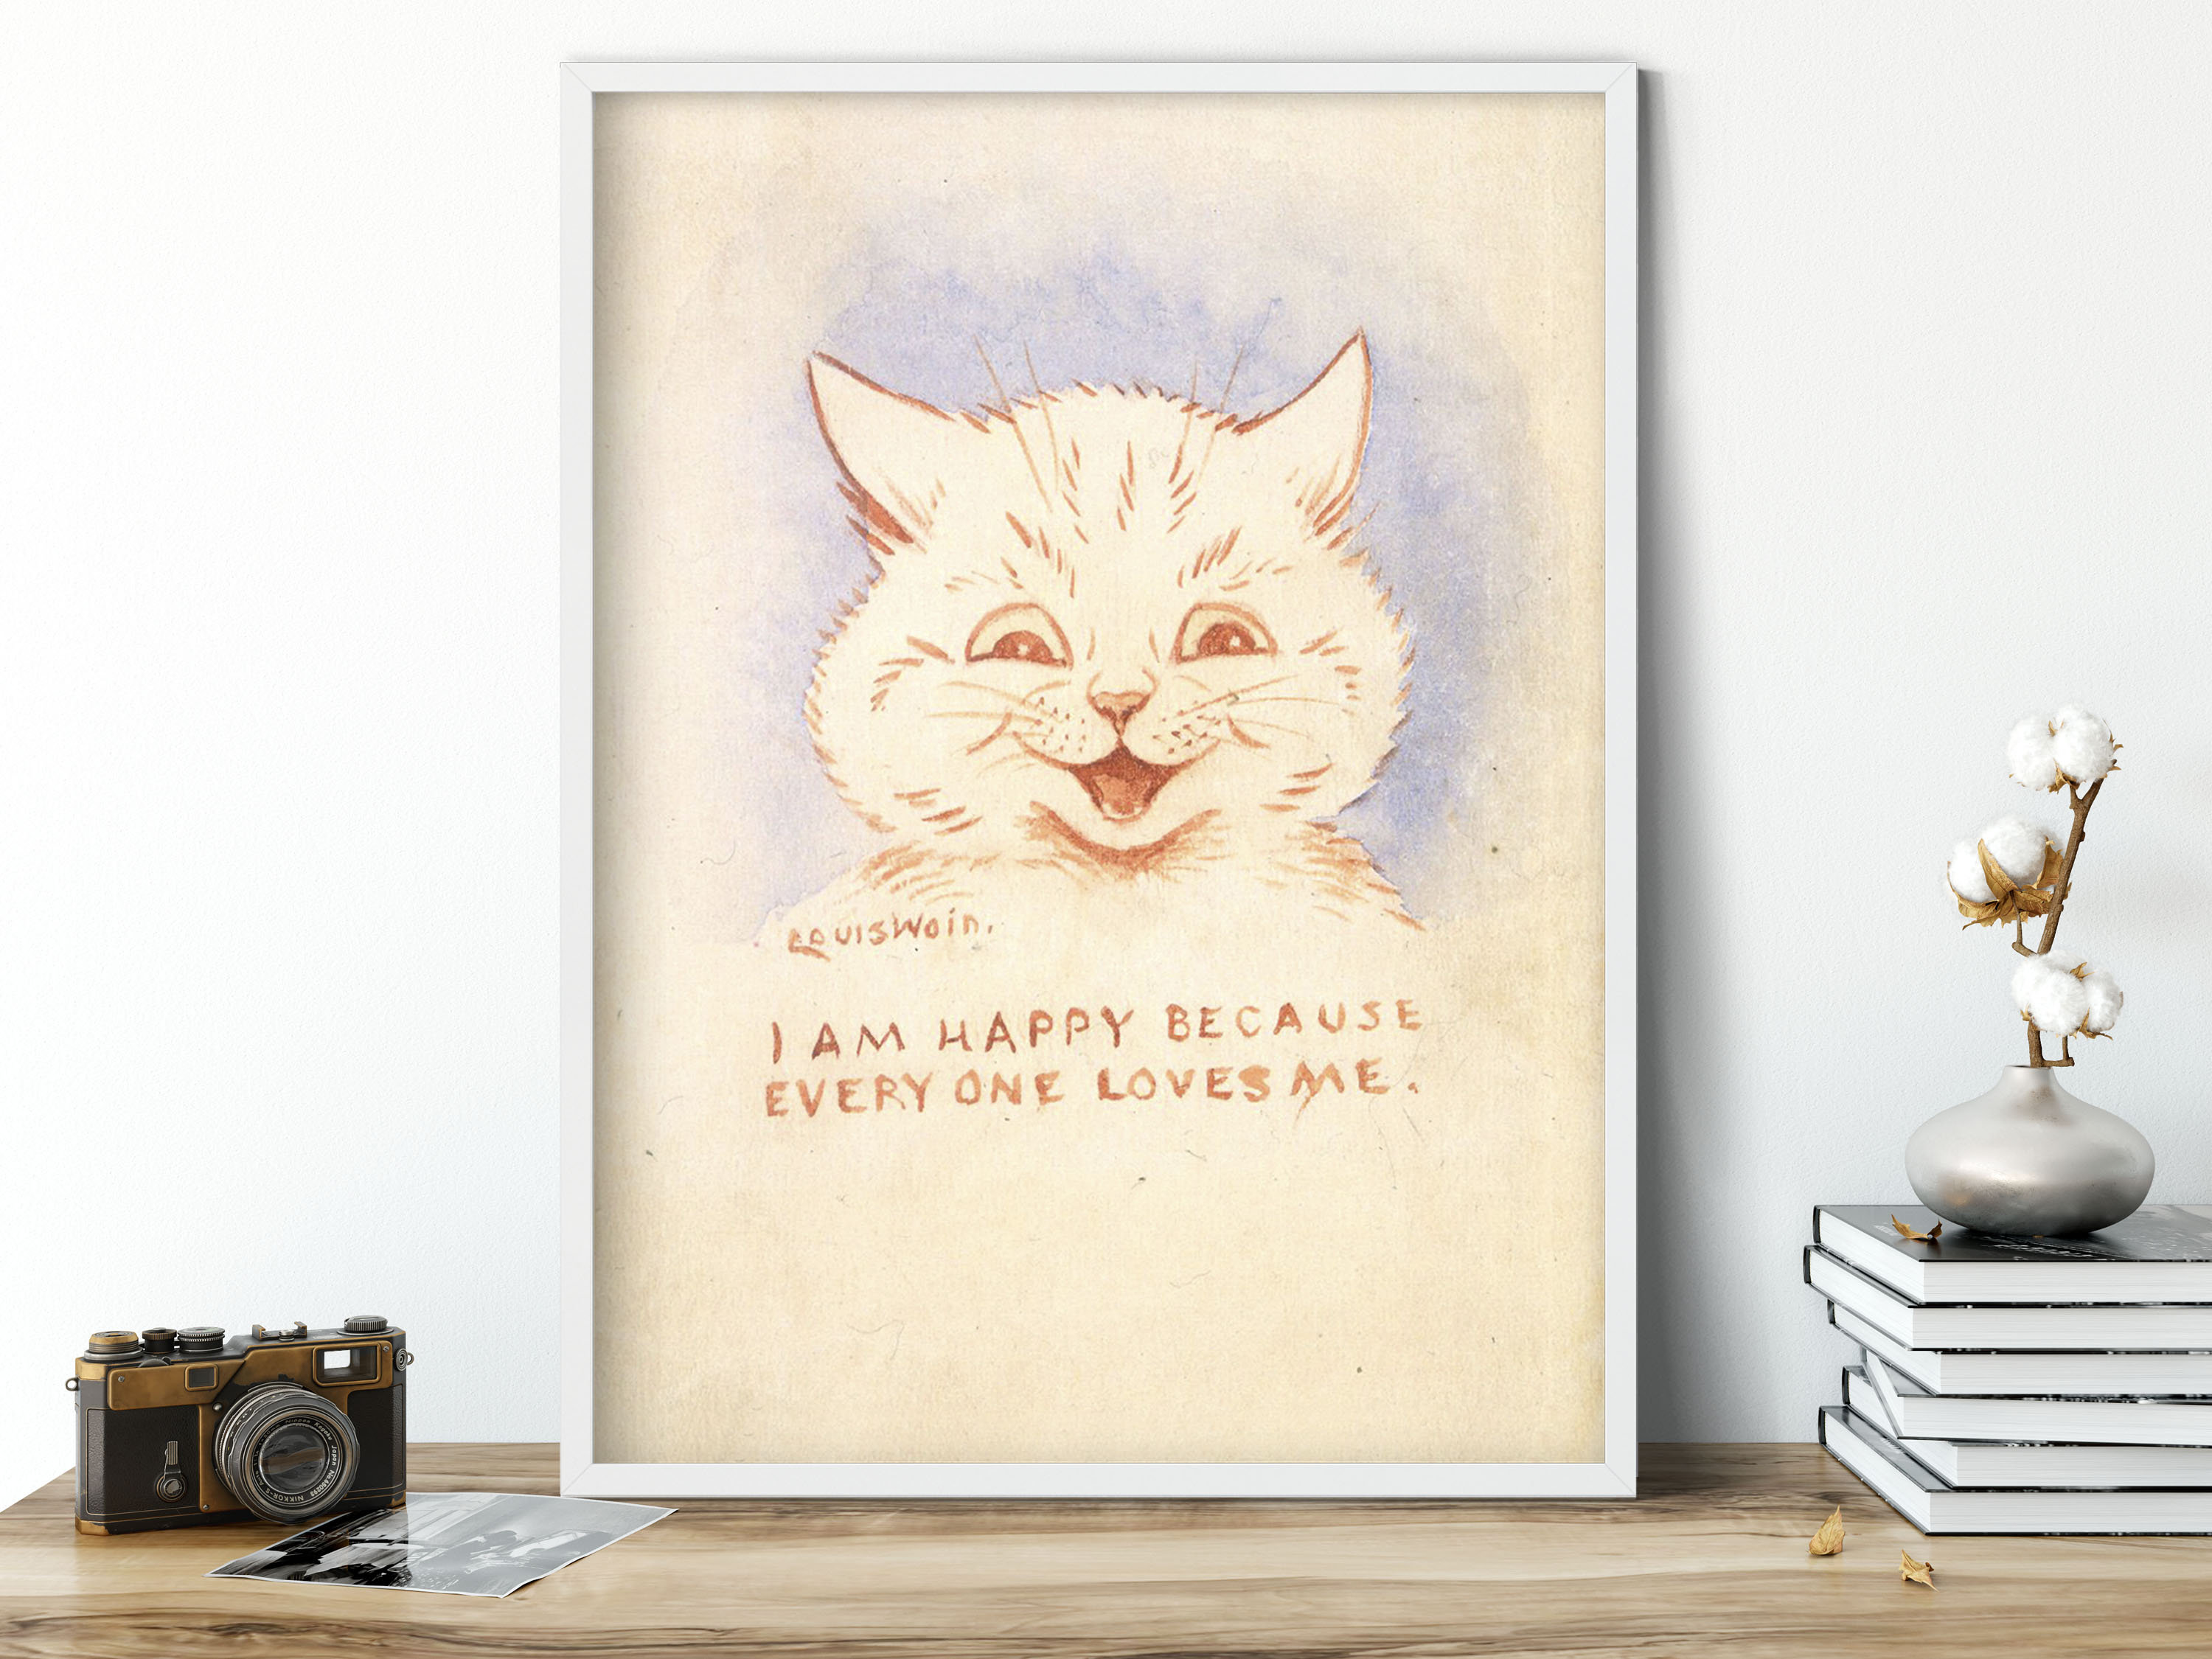  Louis Wain Poster Musical Cat Family Artworks Canvas Room  Aesthetic Wall Art Prints Home Modern Decor Gifts 20x30inch(50x75cm):  Posters & Prints